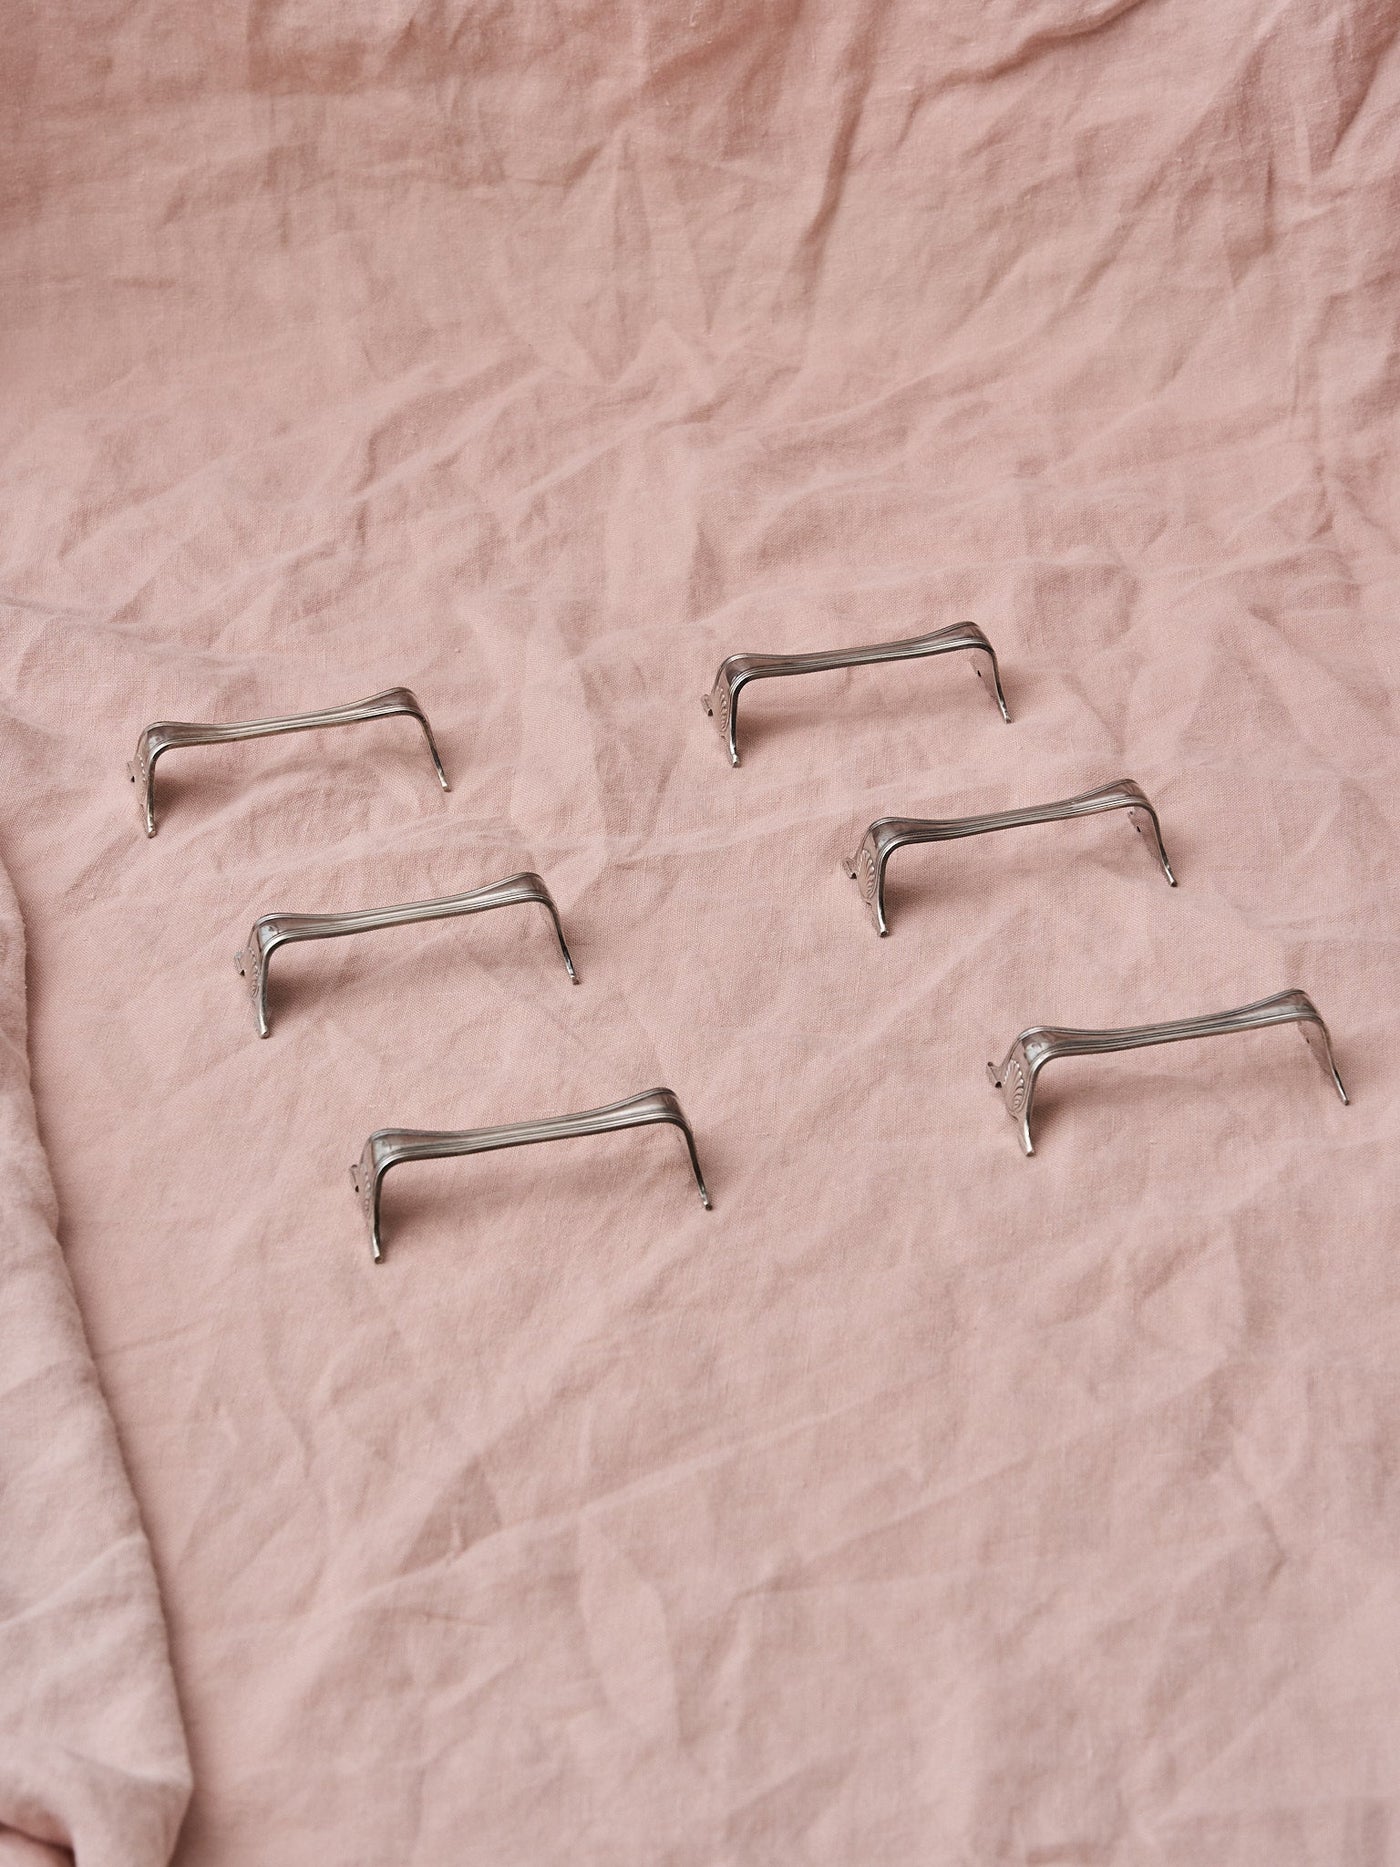 Set of six vintage silver Ecruis cutlery rests from France.